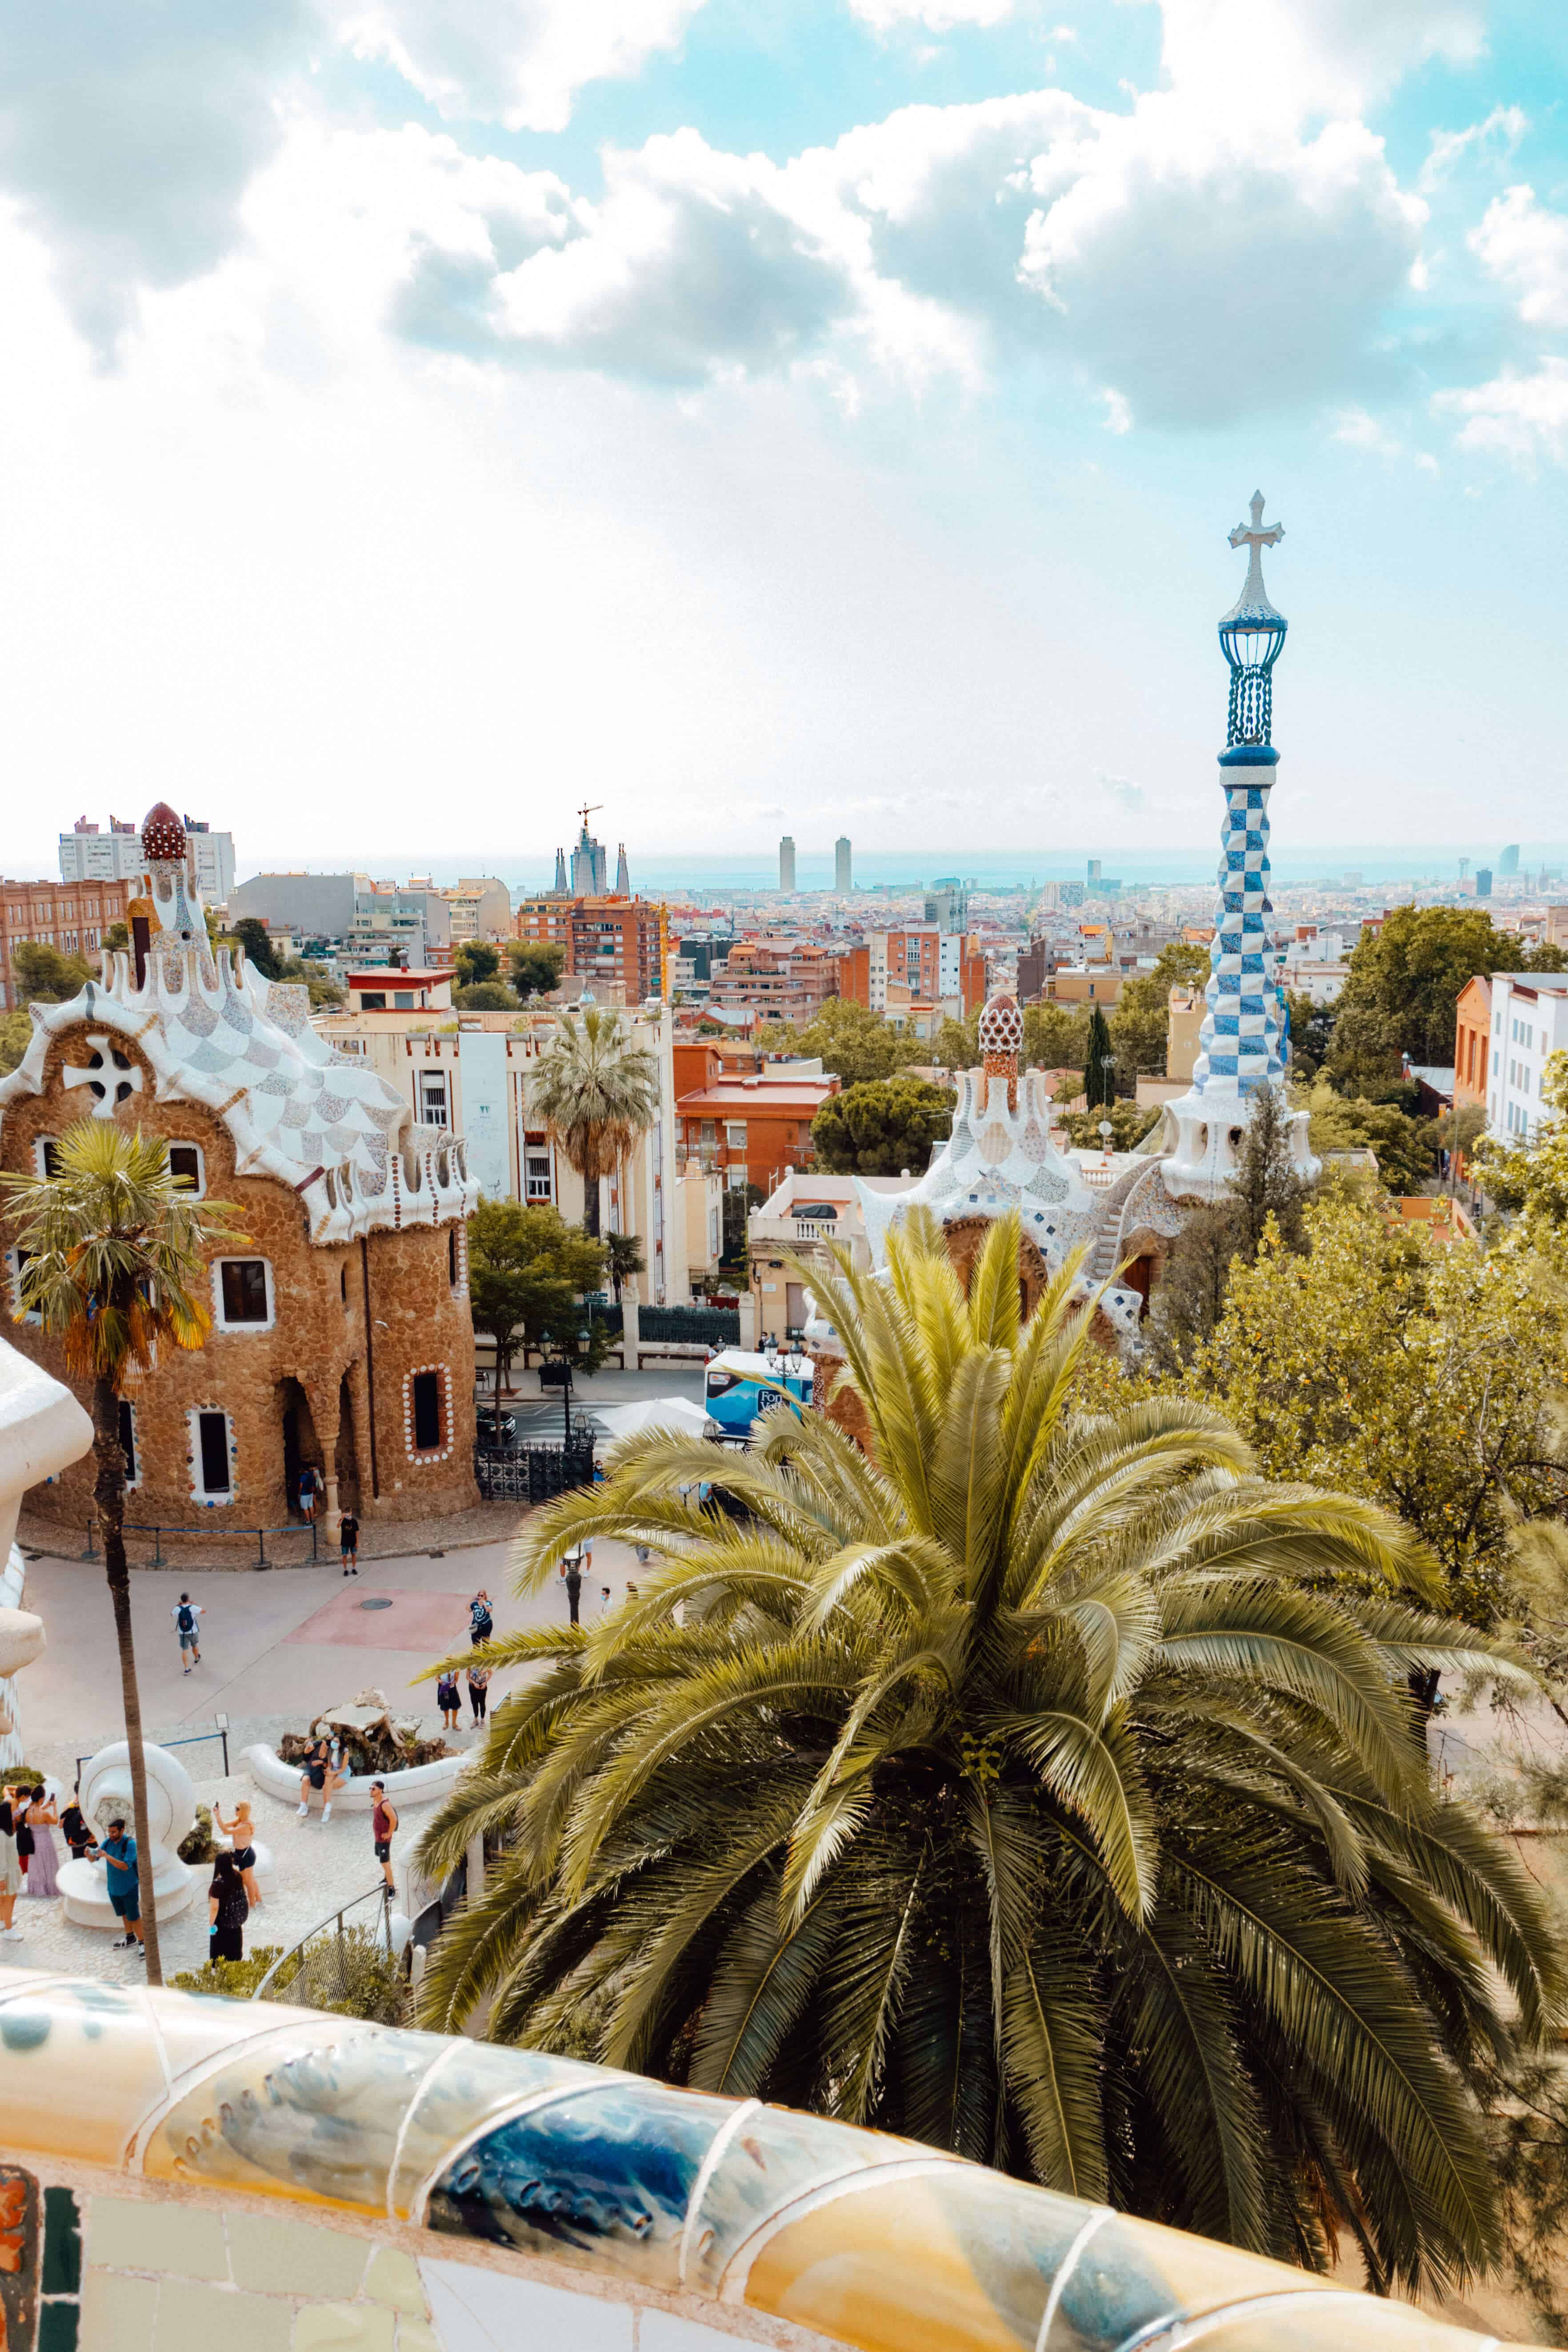 Visiting Park Guell in Barcelona, Spain